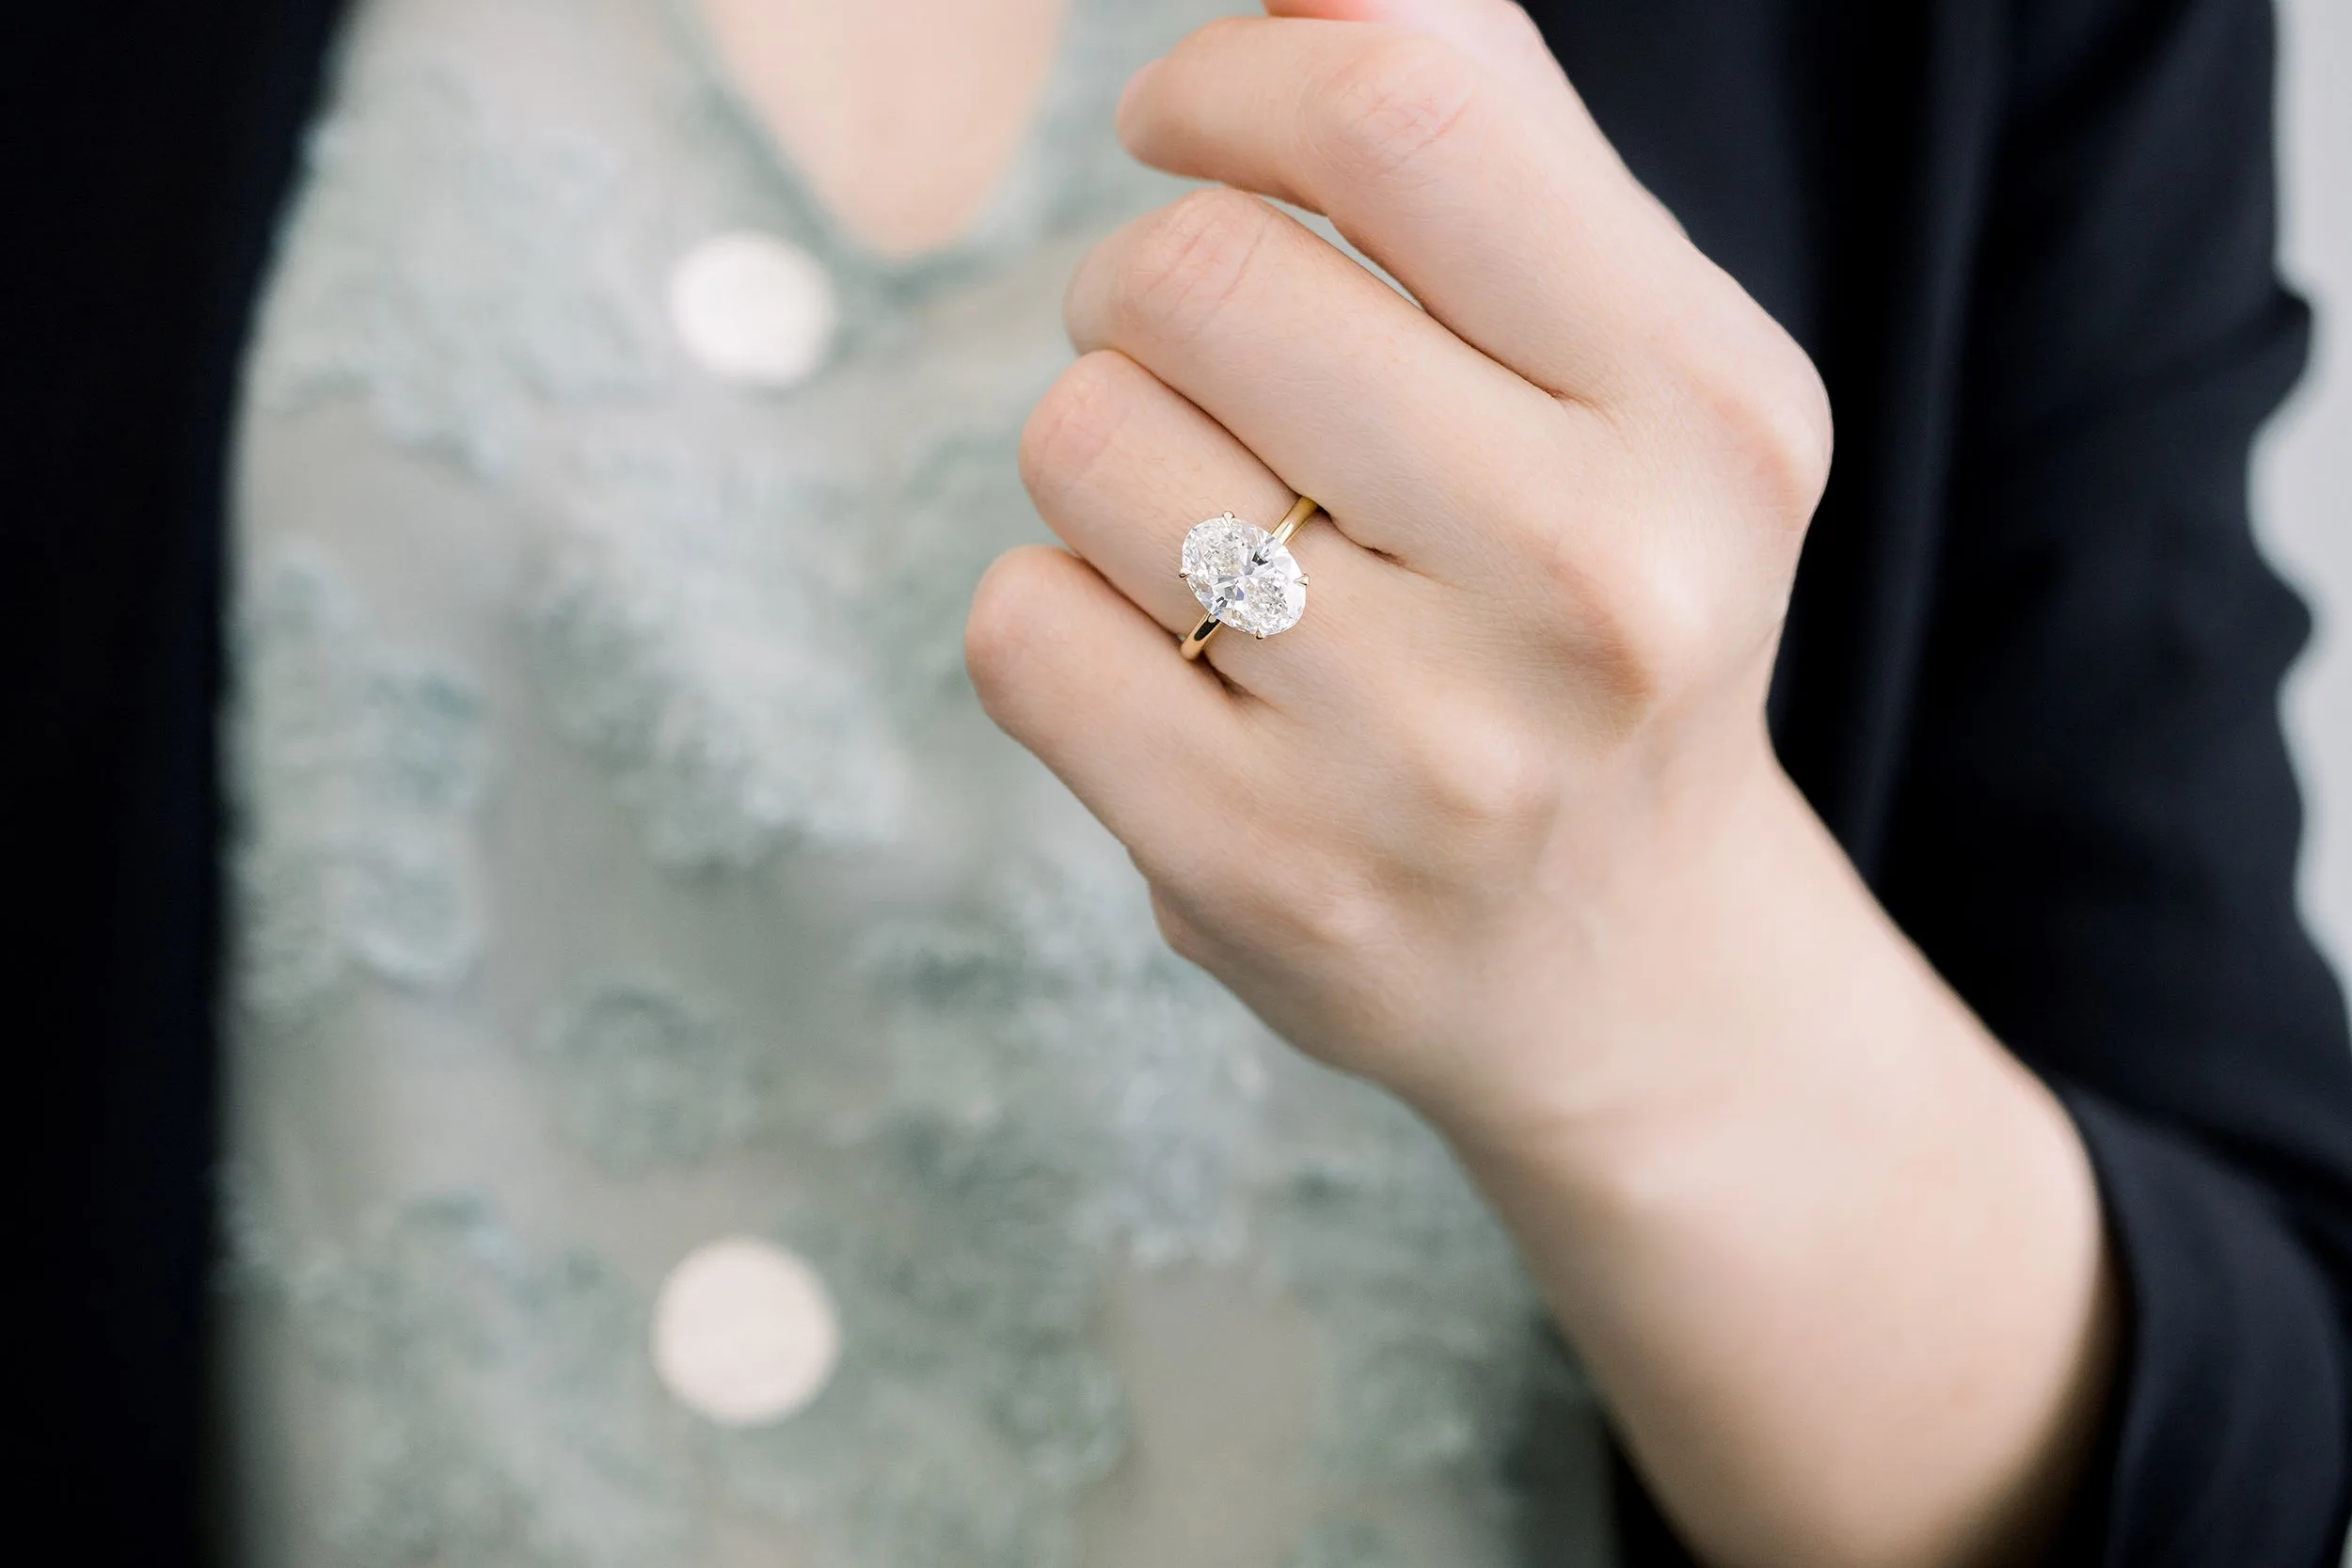 12 best oval engagement rings 2021: Unique styles from large to small |  HELLO!